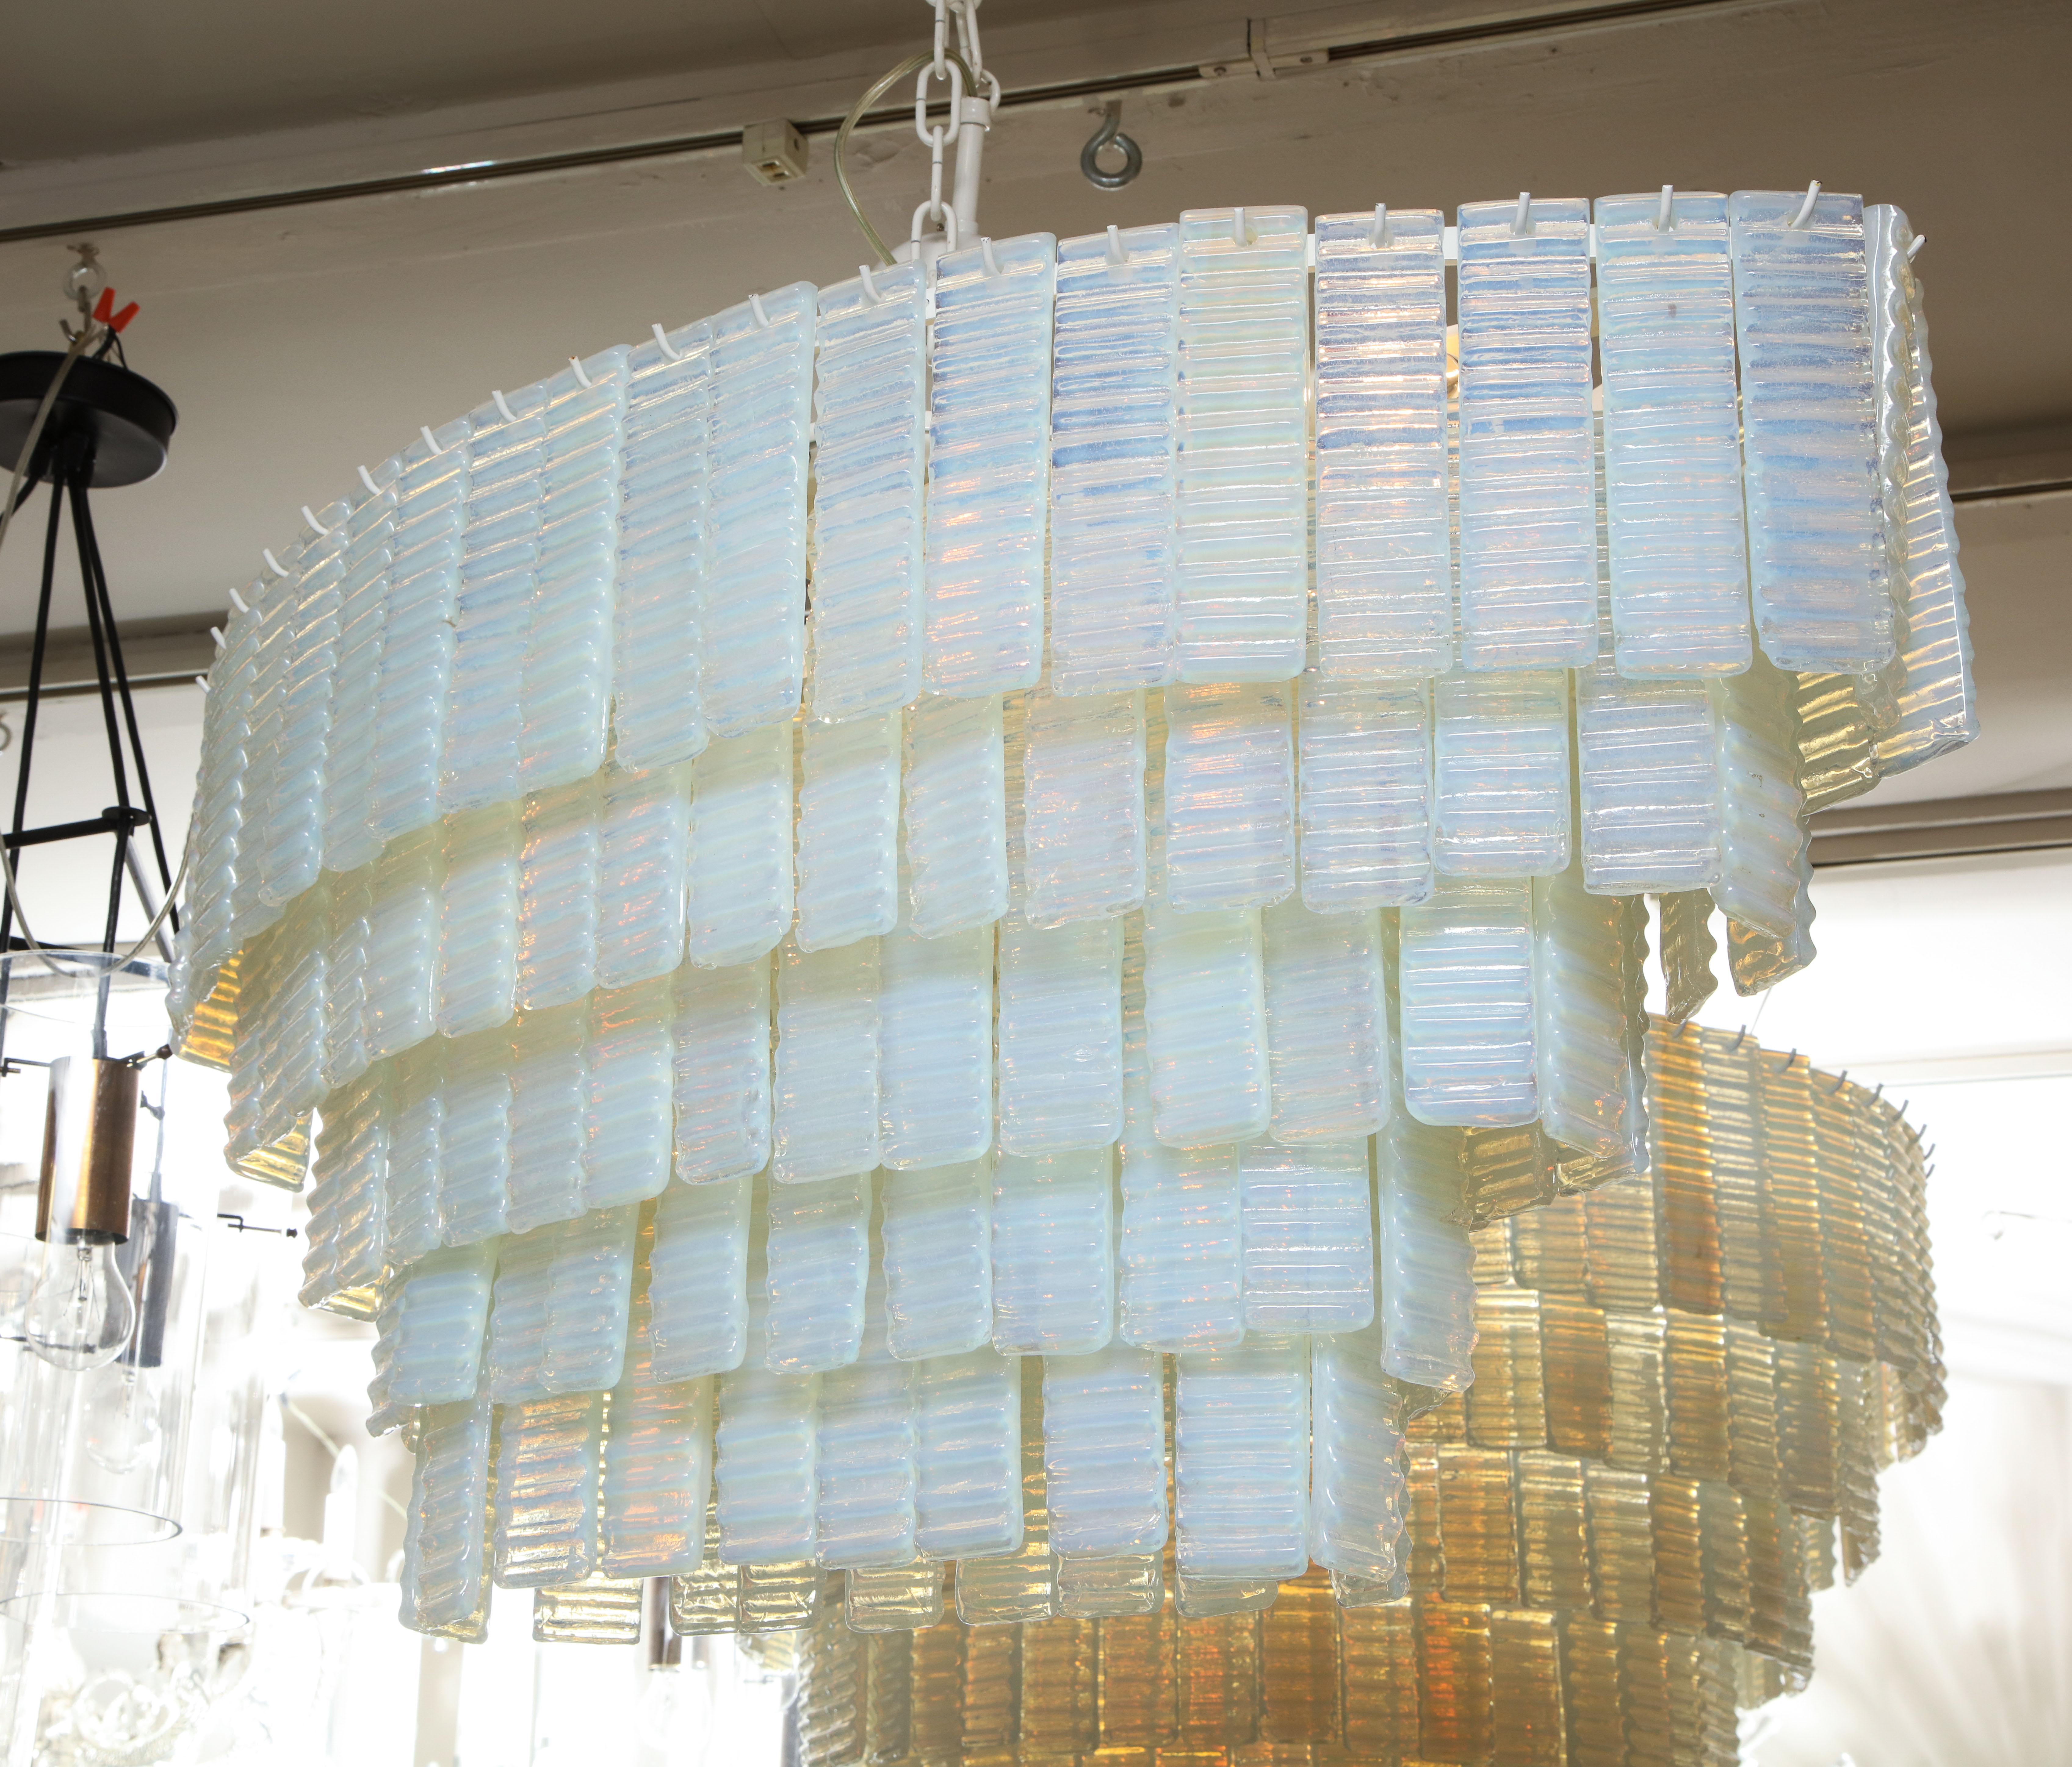 Custom 5 tiered corrugated opalescent Murano glass chandelier in an oval shape. Each opalescent glass piece is carefully handmade by the glass artisans in Murano, Italy. 8 standard socket (E12) on the frame to illuminate the chandelier for the